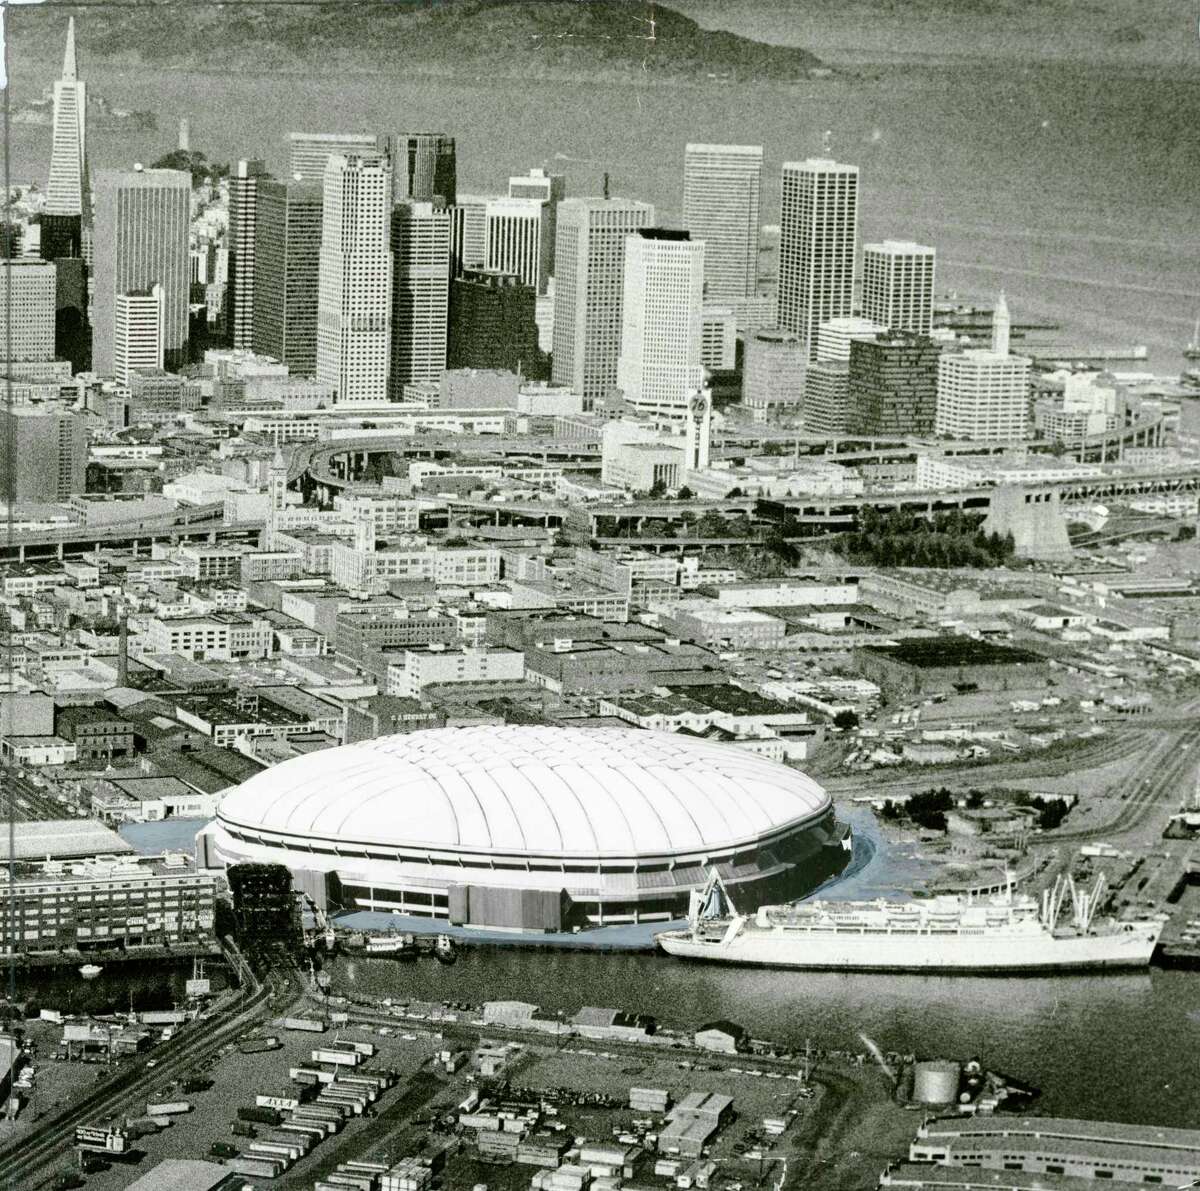 An "artist's conception" of a proposed domed stadium at China Basin. Dec. 20, 1982.